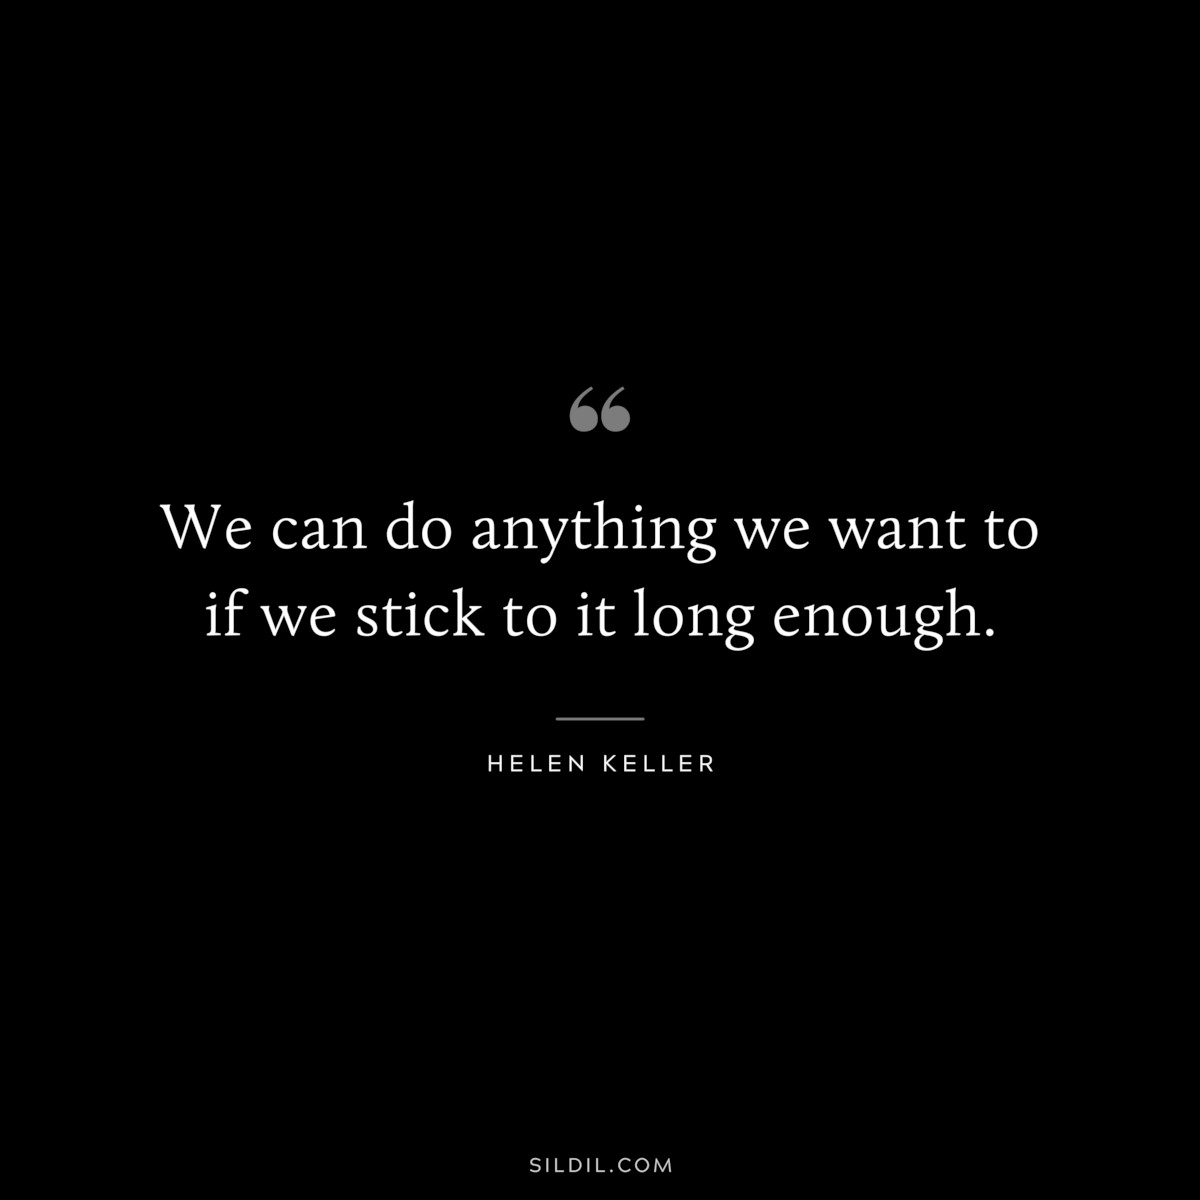 We can do anything we want to if we stick to it long enough. ― Helen Keller